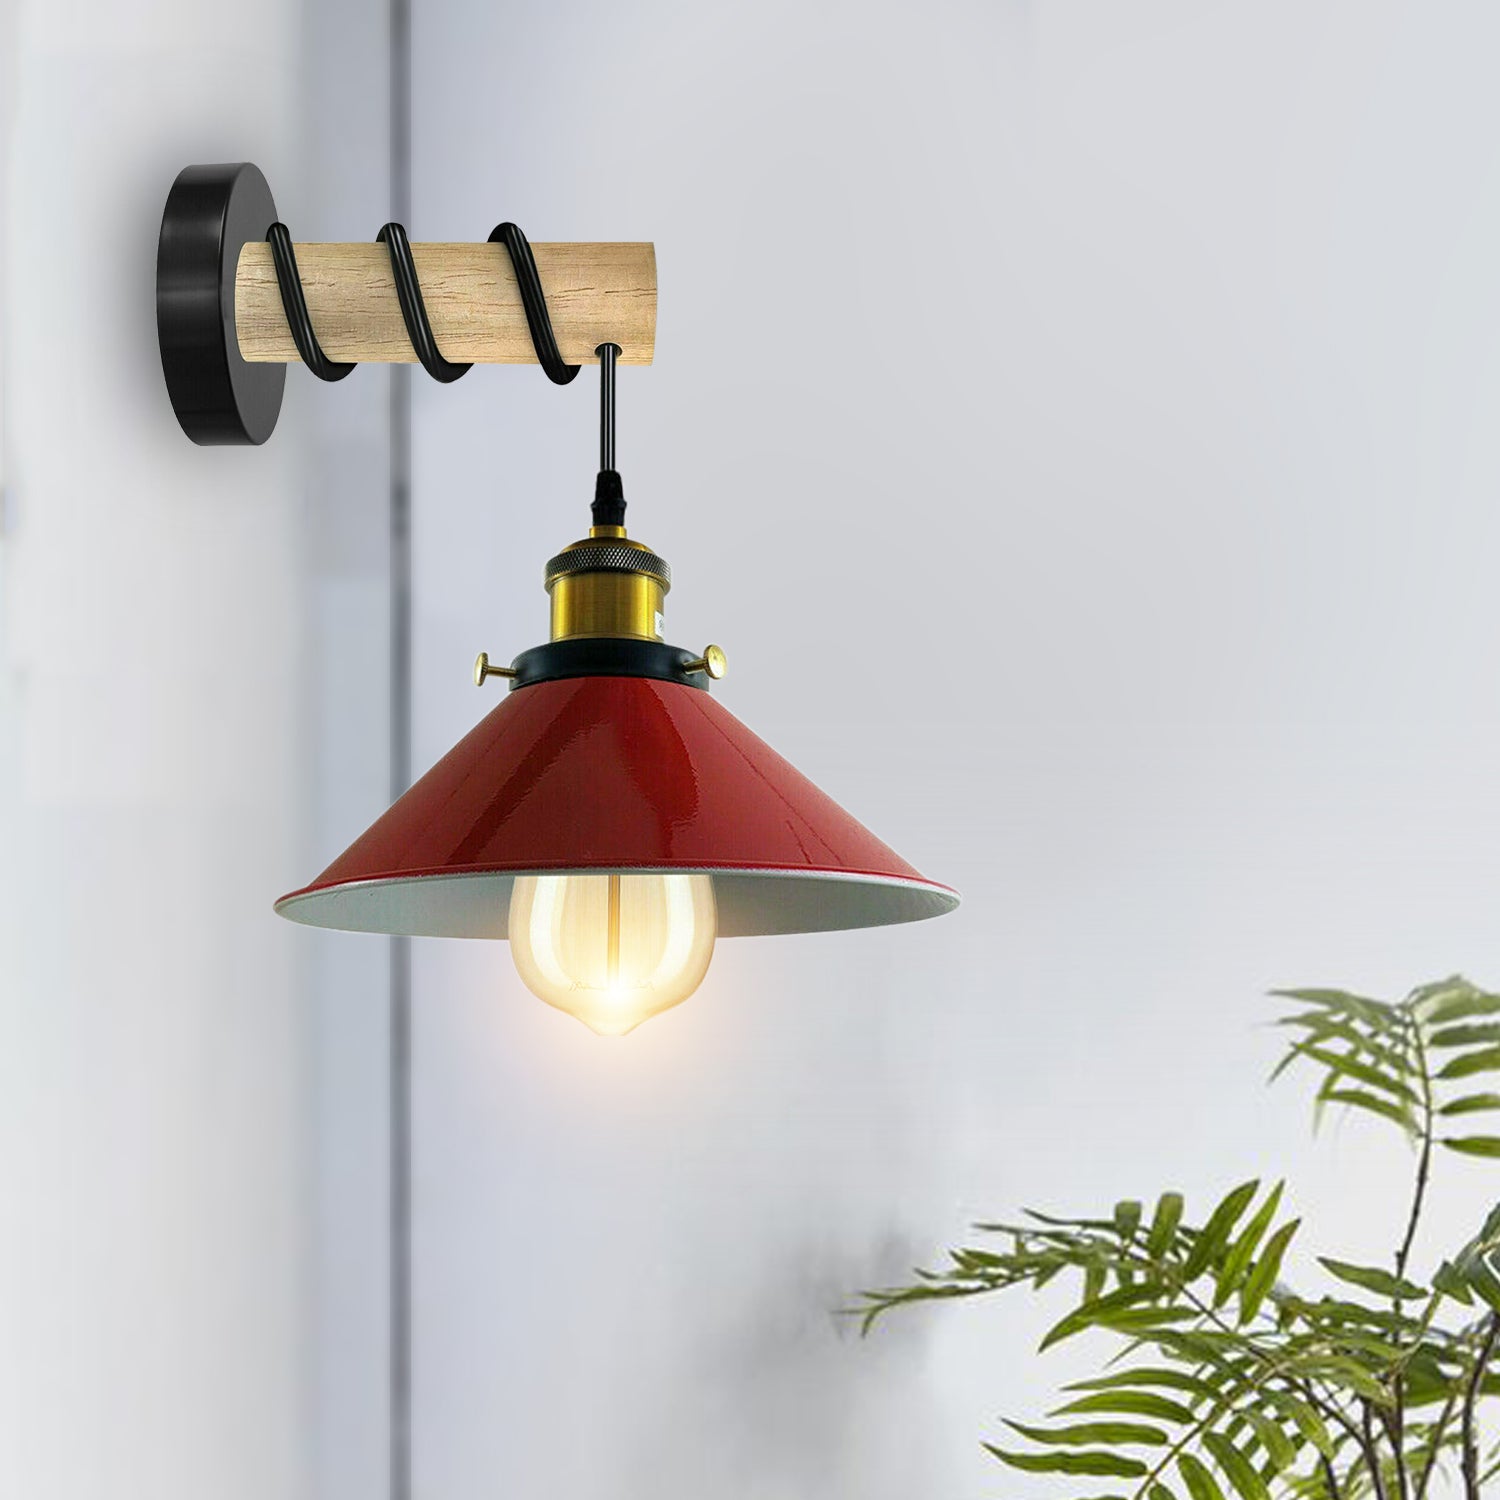 Modern Combined Solid Wooden Arm Chandelier Lighting With Red Cone Shaped Metal Shade wall sconce~3475 - LEDSone UK Ltd